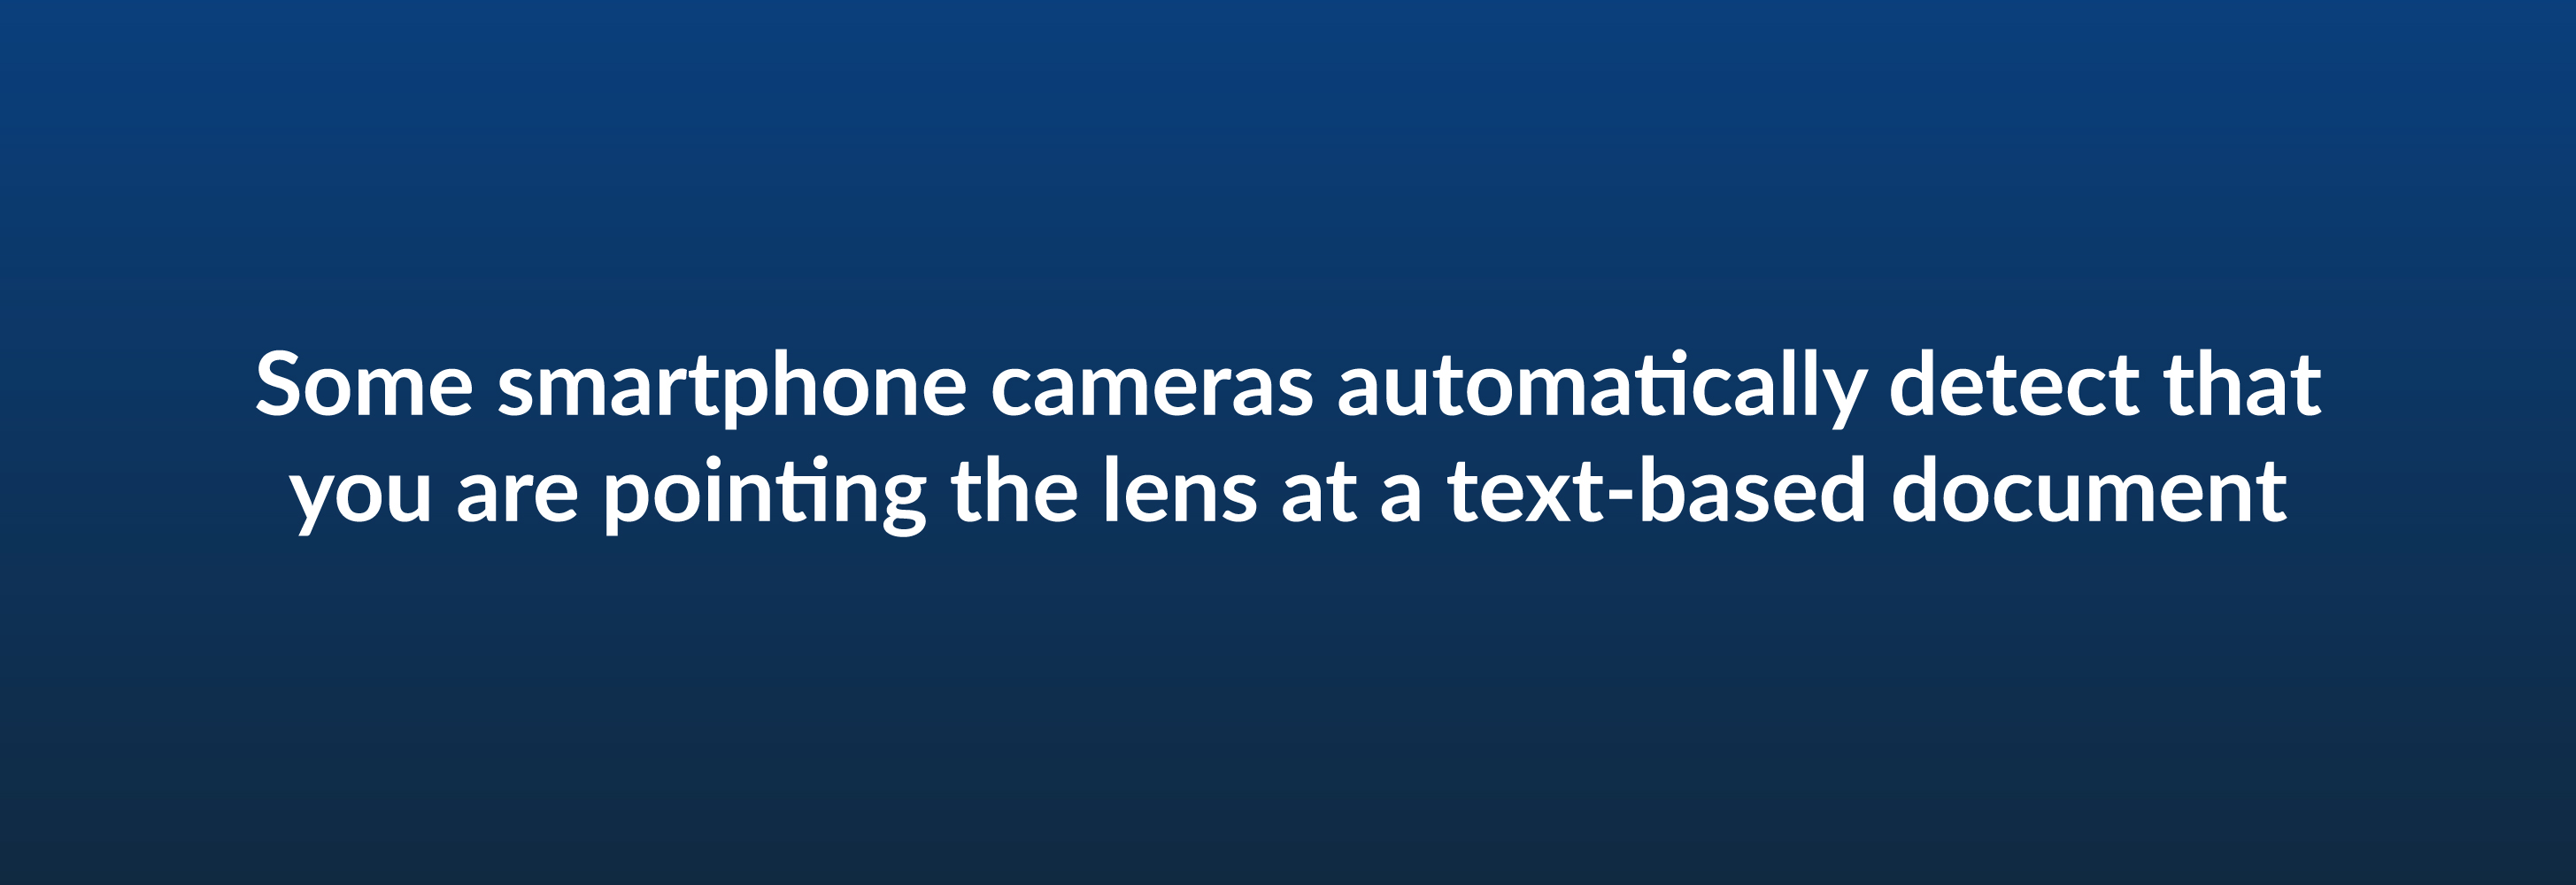 Some smartphone cameras automatically detect that you are pointing the lens at a text-based doucment